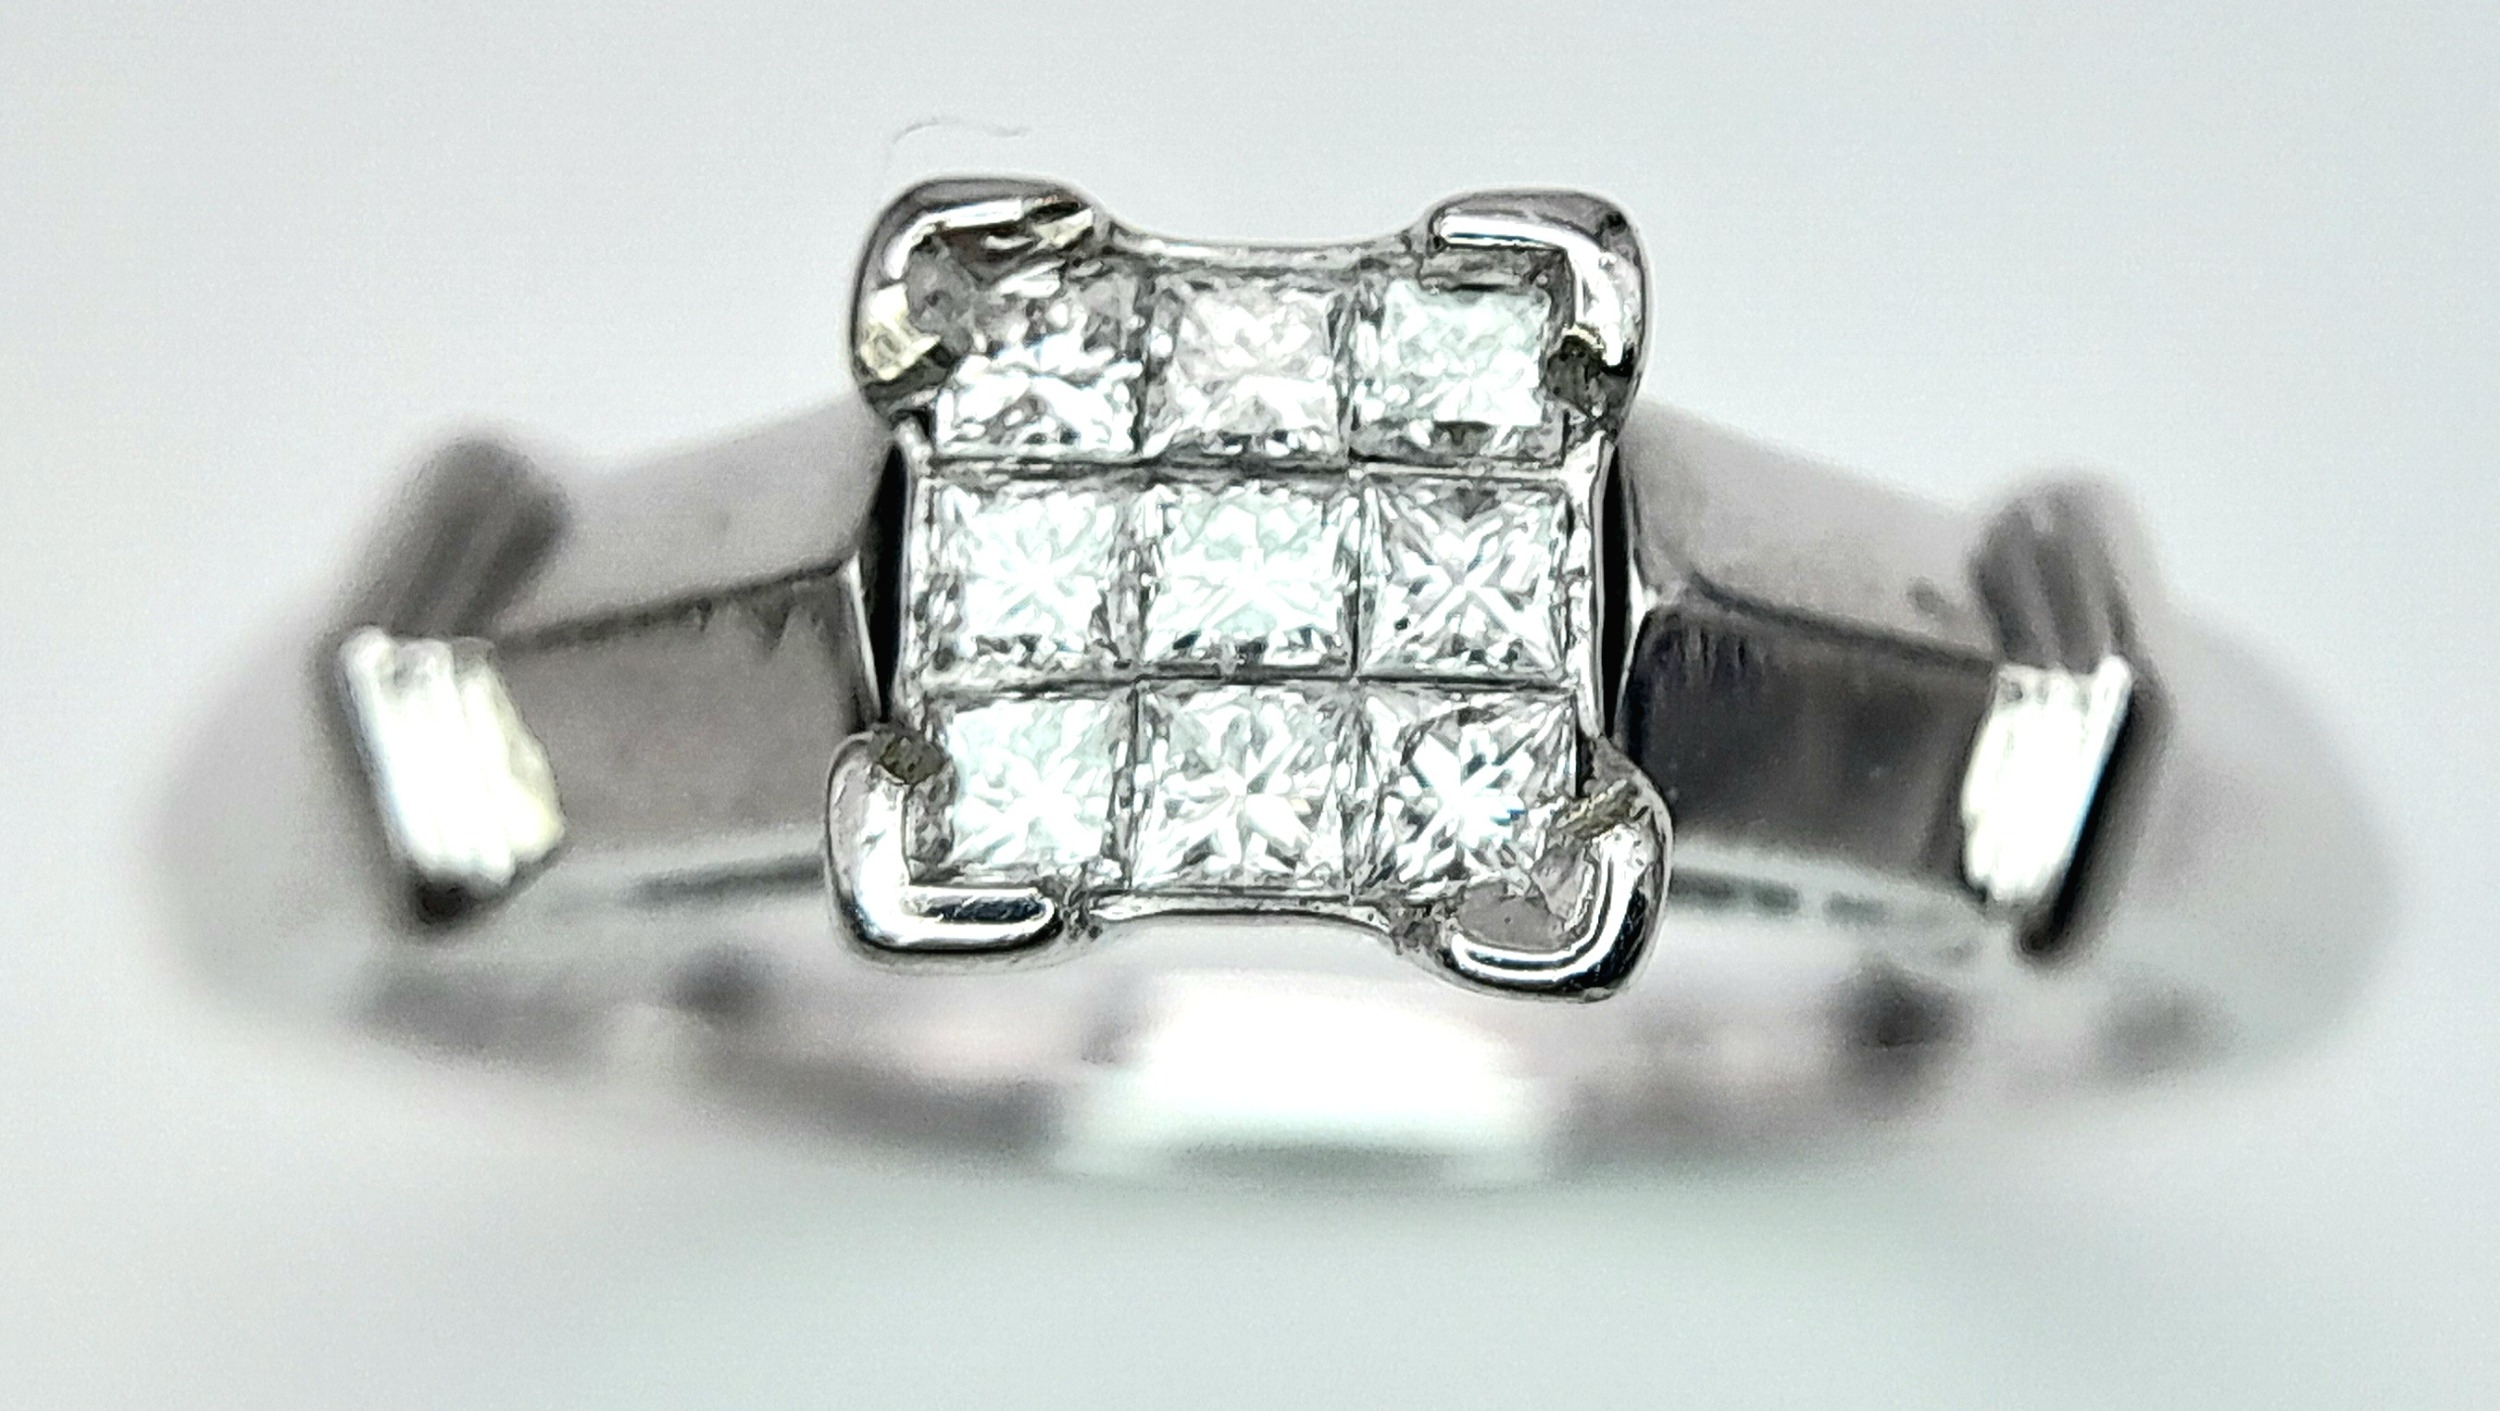 AN 18K WHITE GOLD DIAMOND RING. 0.25ctw, Size M, 5.1g total weight. Ref: SC 8067 - Image 2 of 6